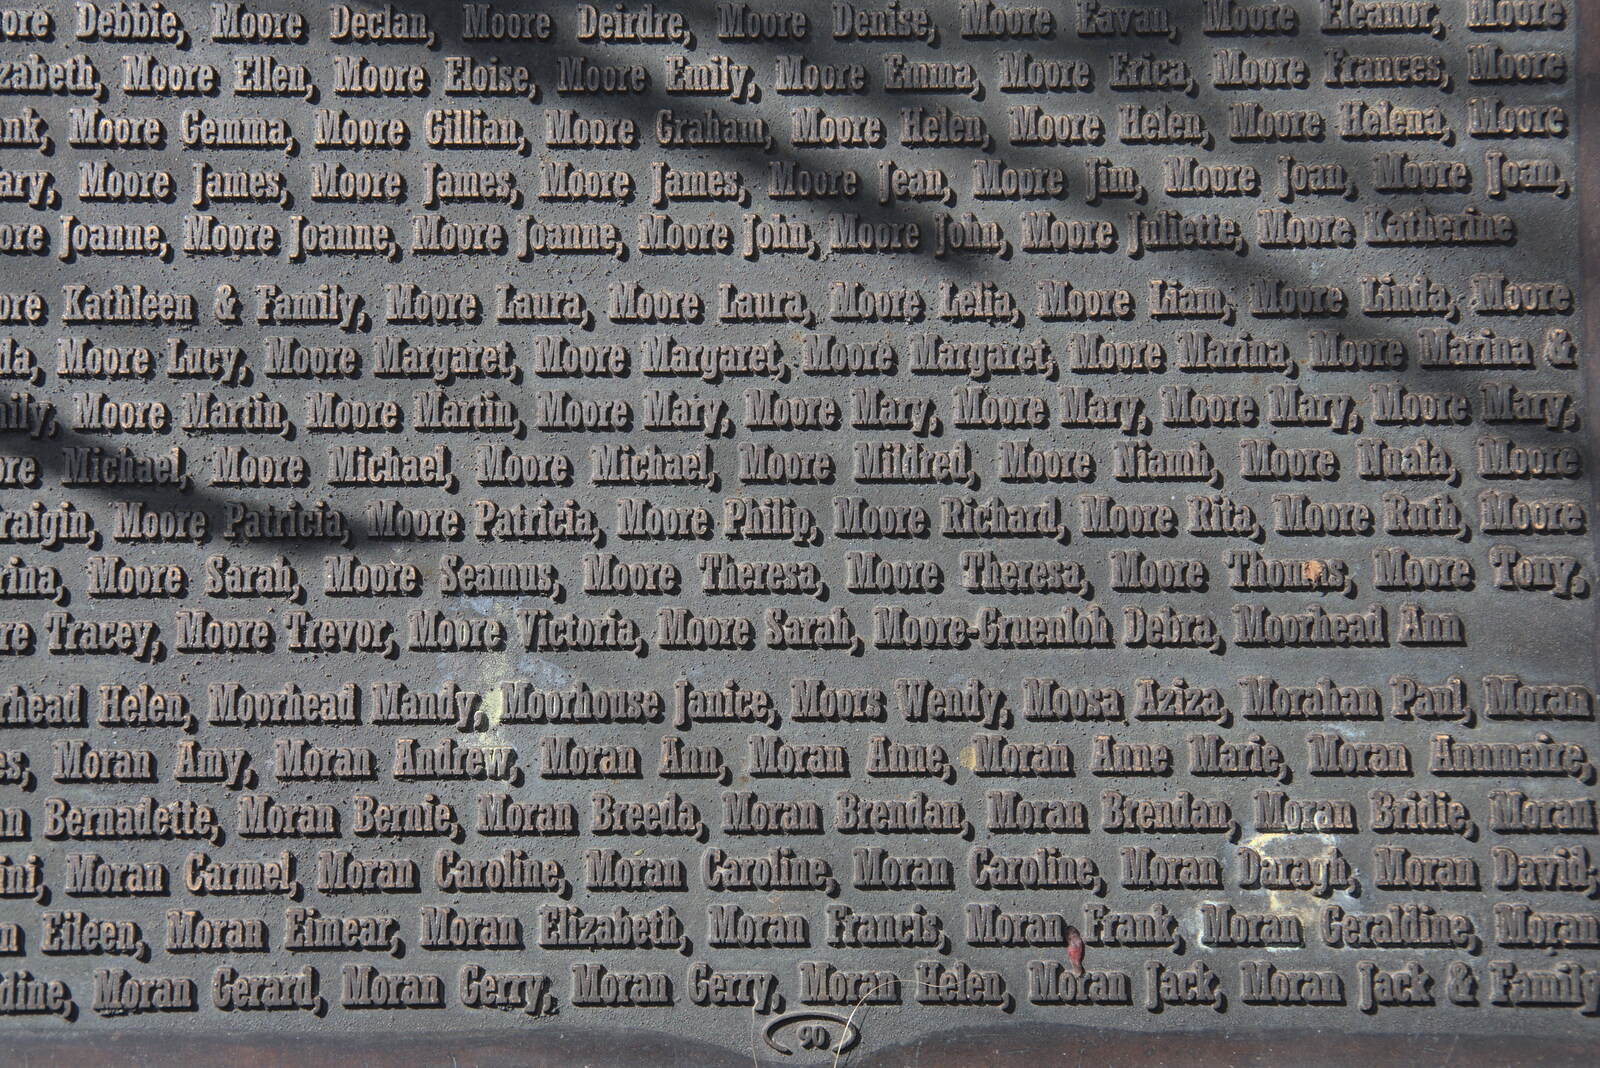 Part of a memorial name wall from A Trip to Noddy's, and Dublin City Centre, Wicklow and Dublin, Ireland - 16th August 2021